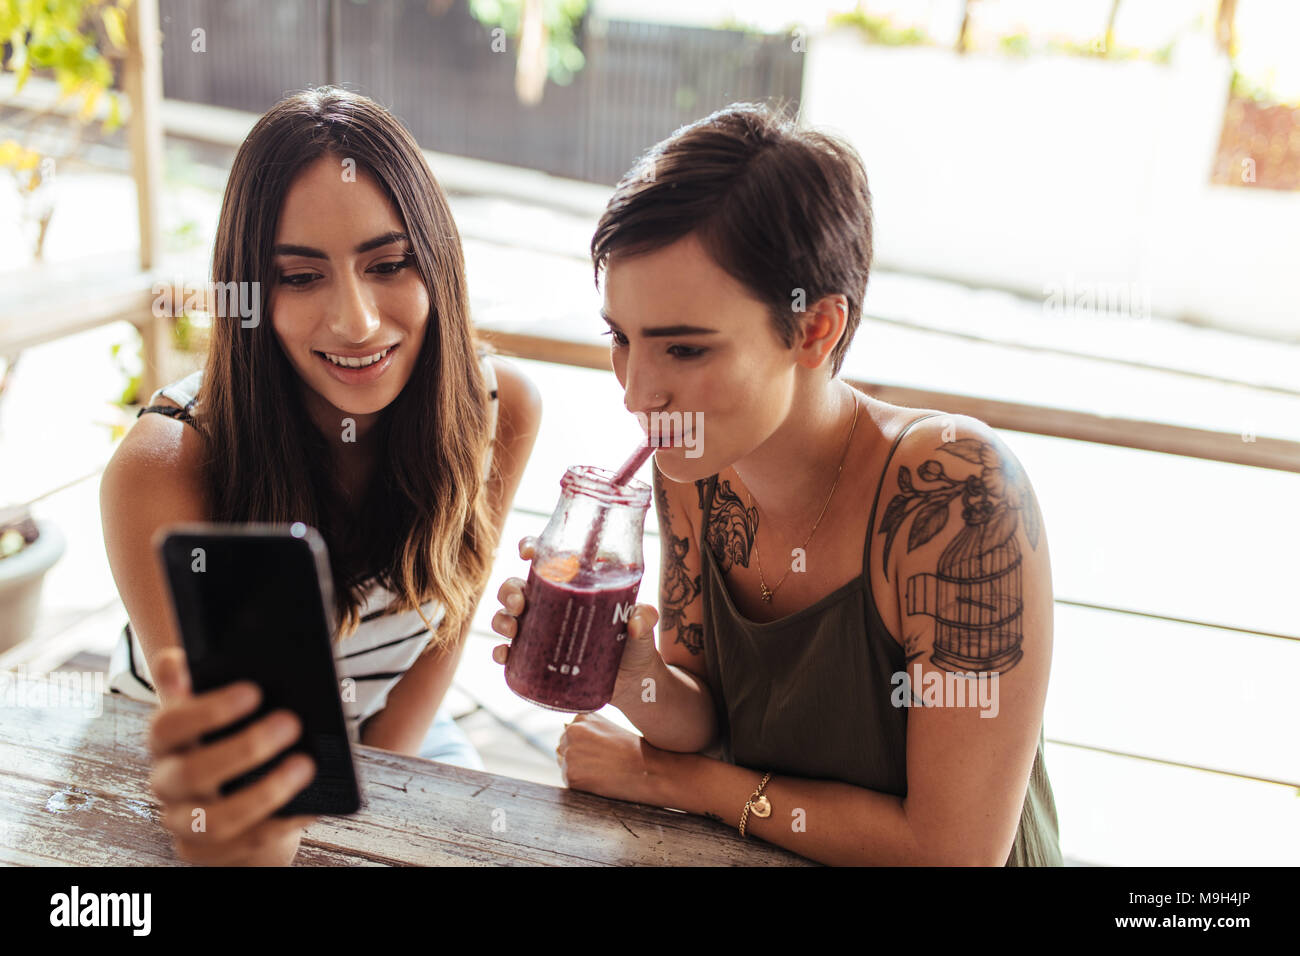 Two women sitting at a restaurant looking at a mobile phone. Woman showing mobile phone while another woman enjoys a smoothie. Stock Photo